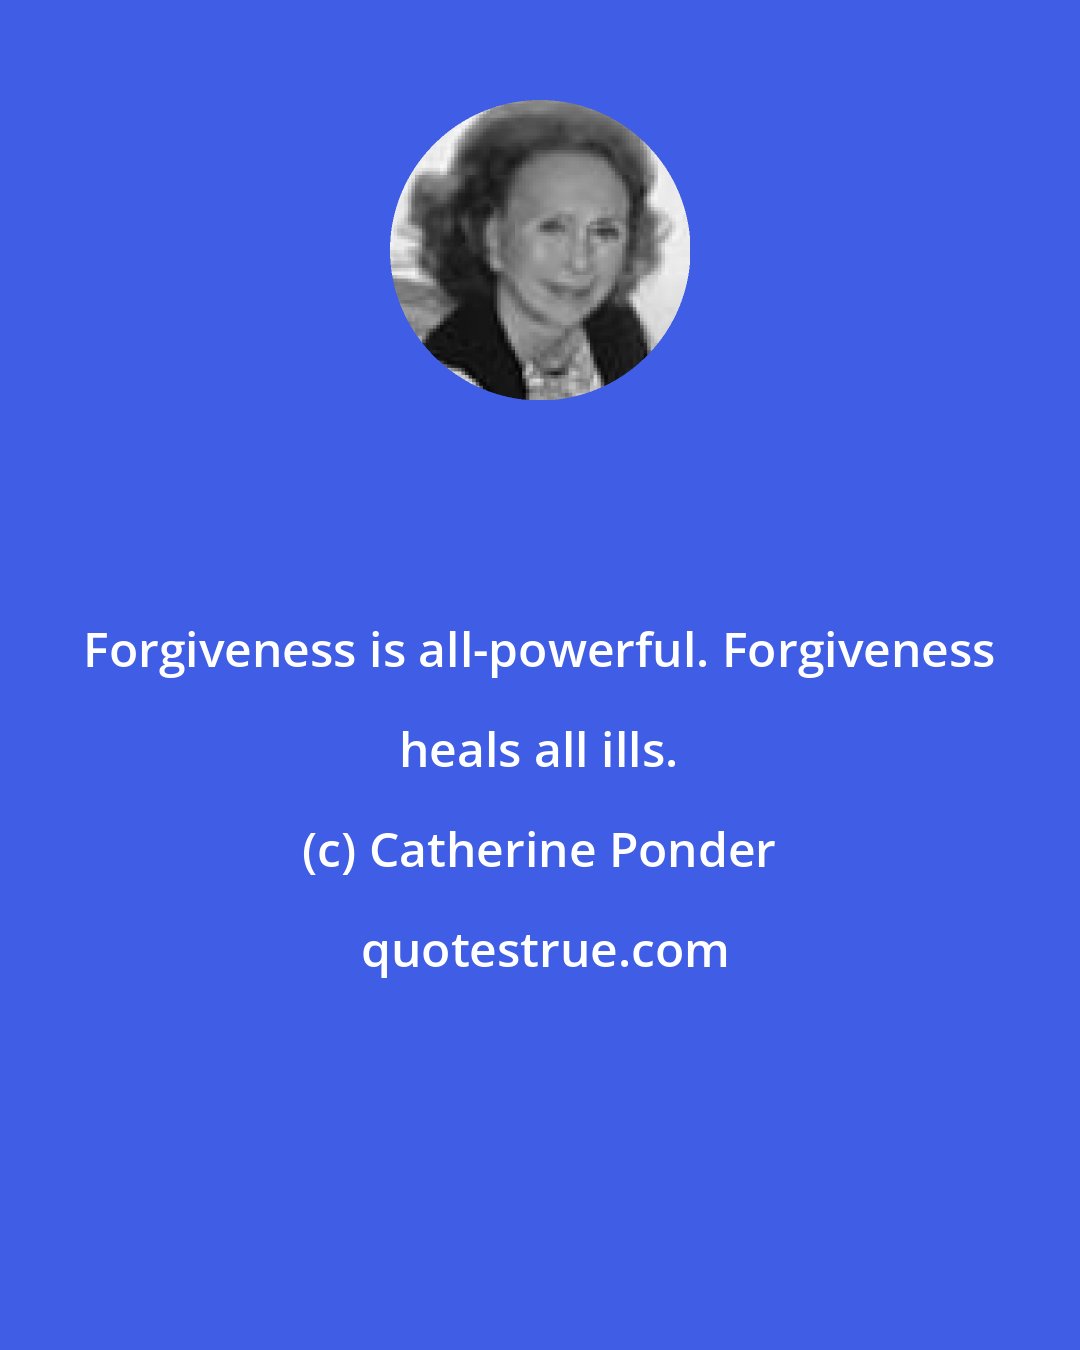 Catherine Ponder: Forgiveness is all-powerful. Forgiveness heals all ills.